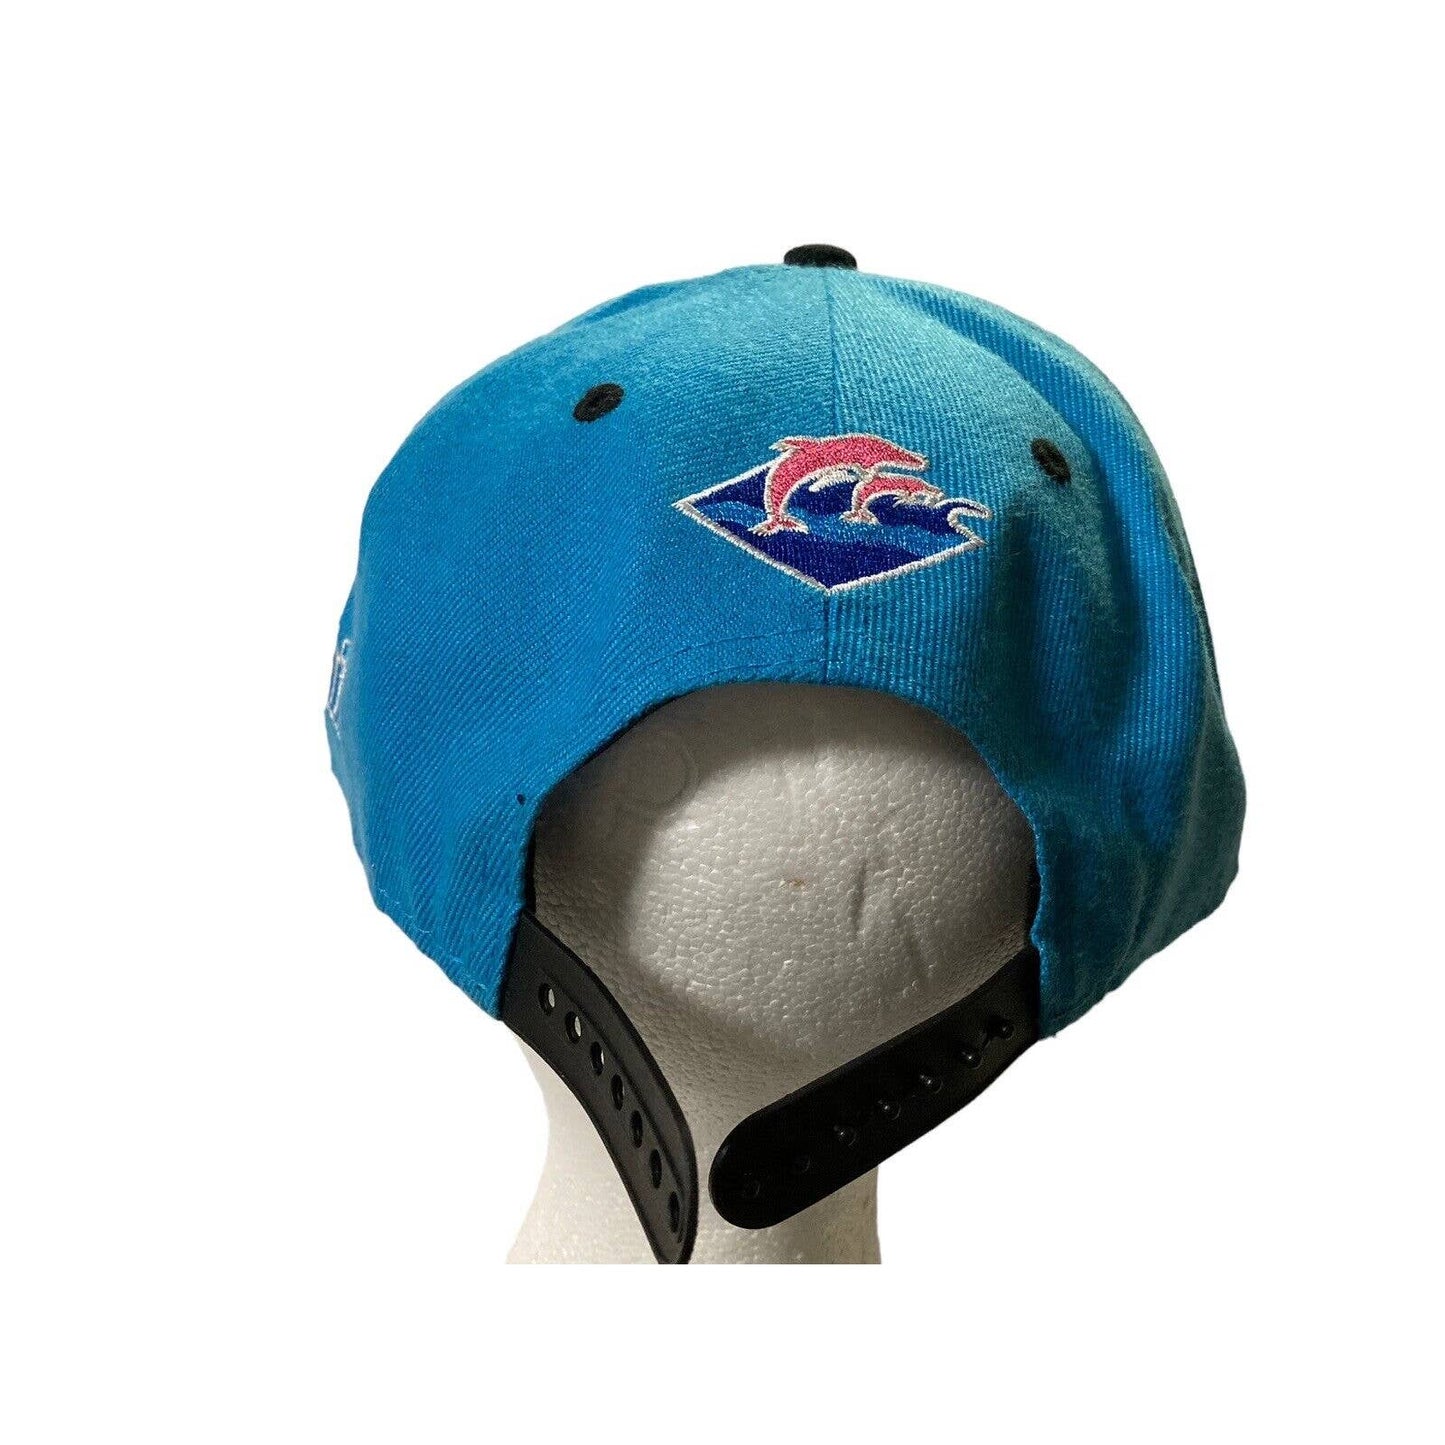 Pink + Dolphin P Logo Snapback Embroidered Hat Cap Blue Black